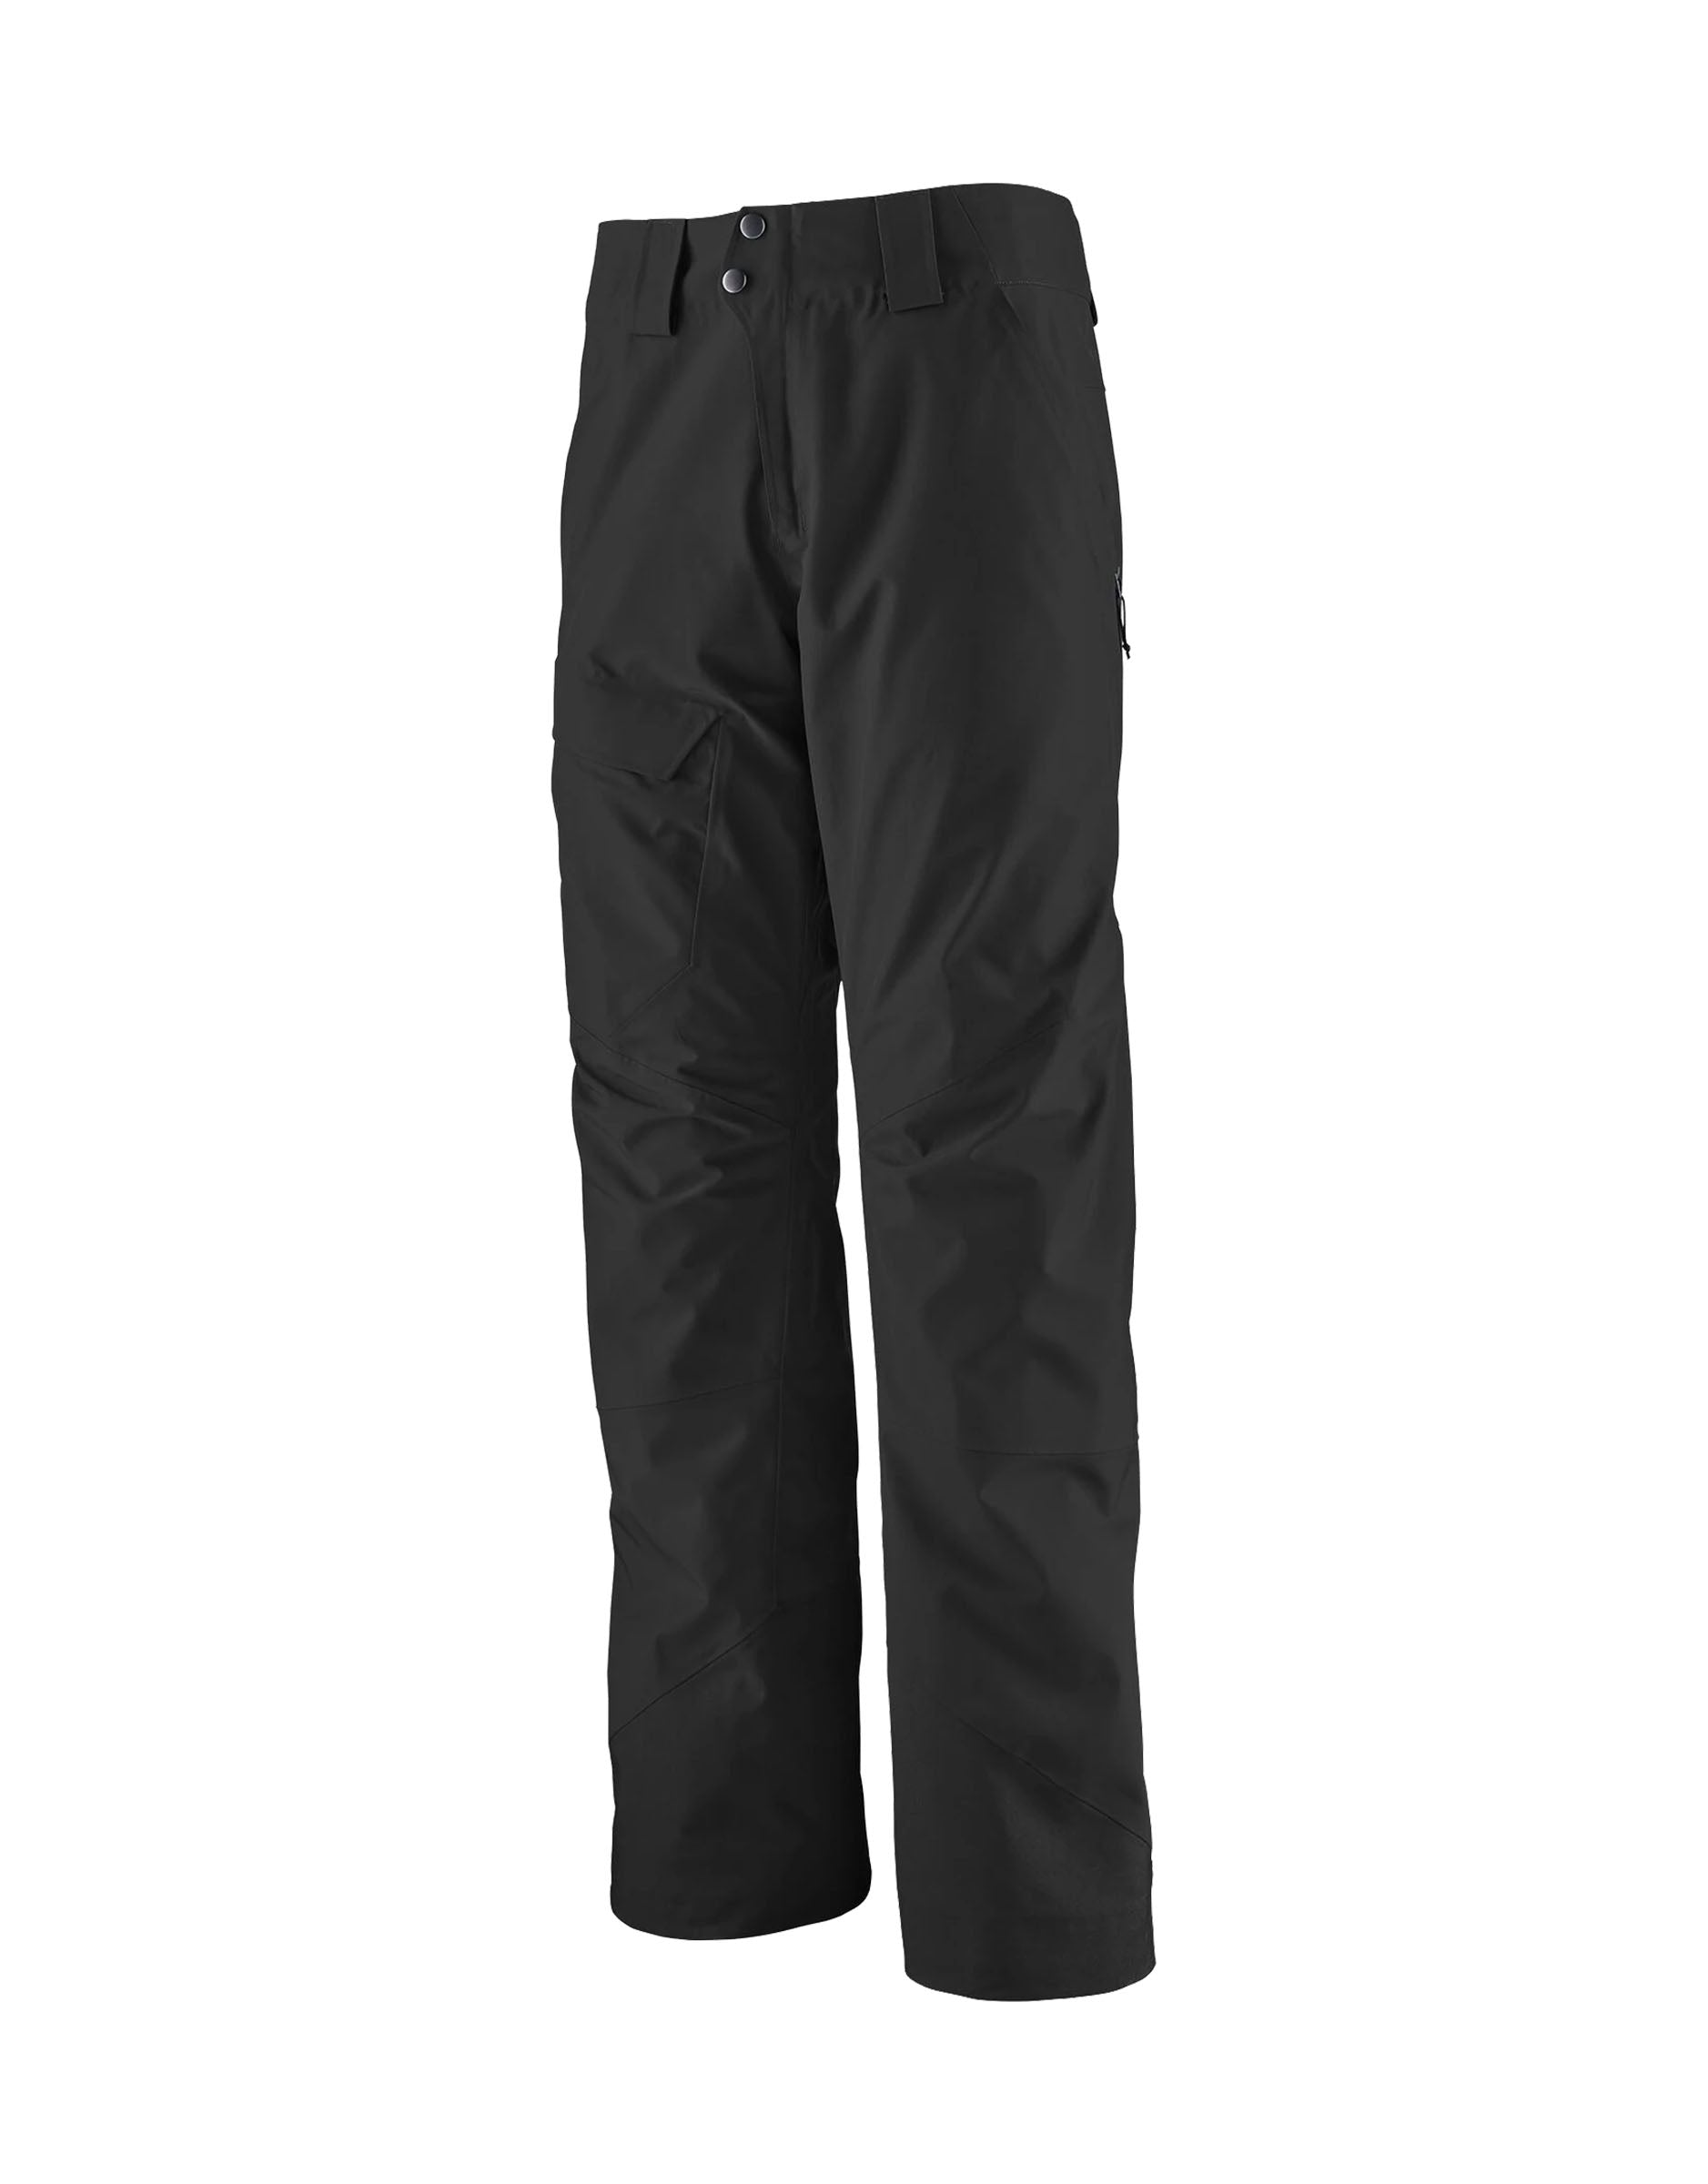 Patagonia Insulated Powder Bowl Pant Review  Switchback Travel